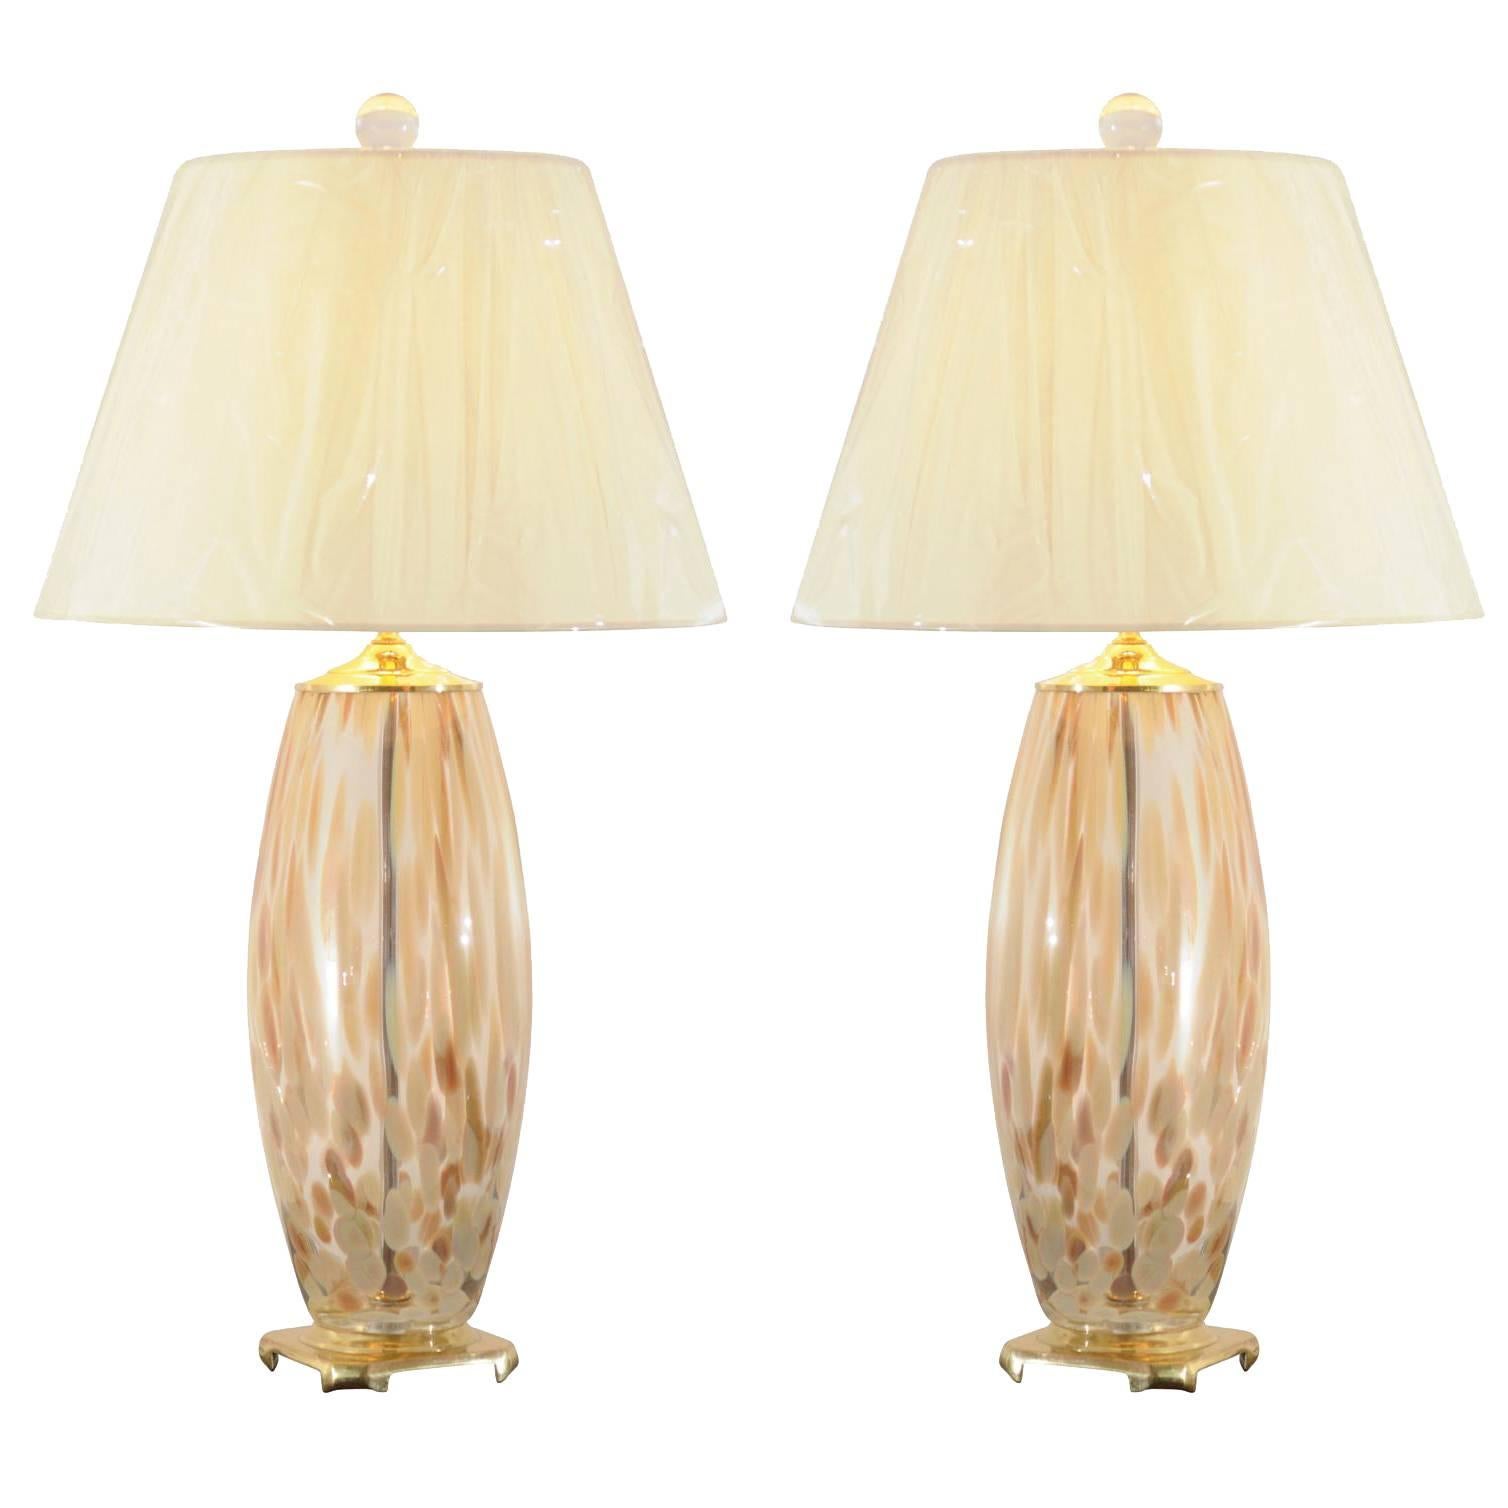 Stunning Pair of Blown Murano Lamps with Brass and Lucite Accents